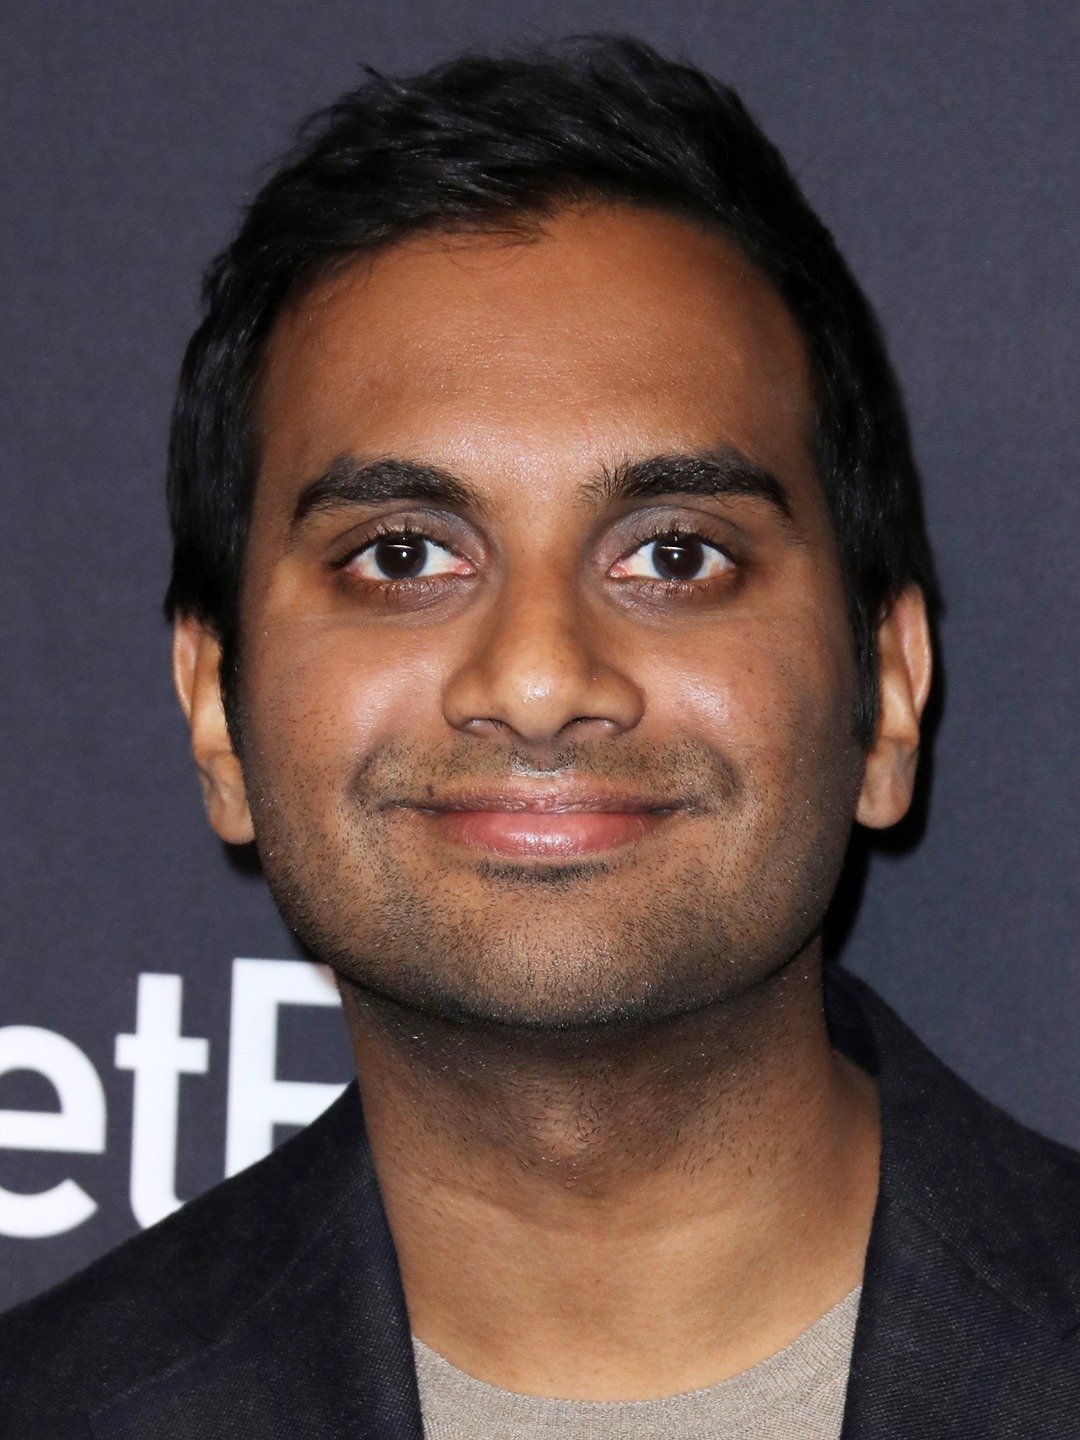 Aziz Ansari: A Comedy Icon’s Journey and Recent Career Disruptions